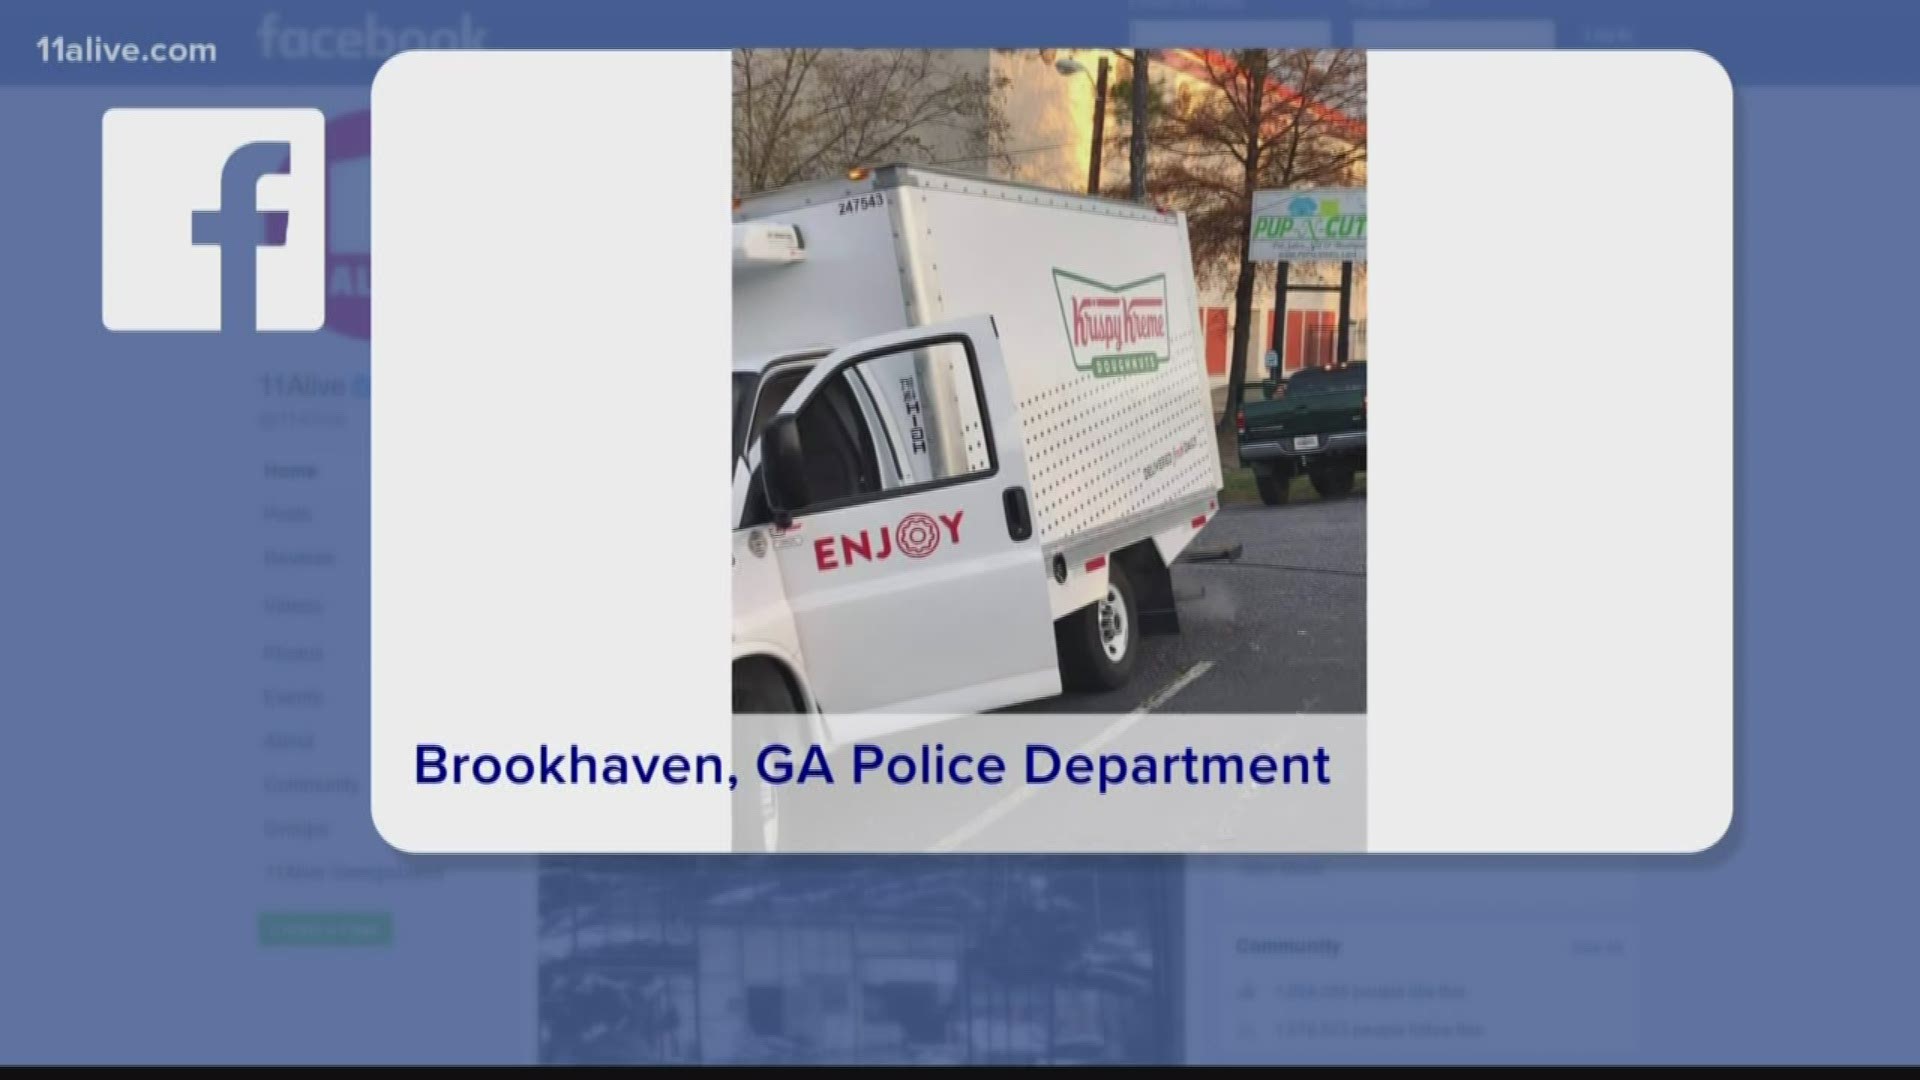 Brookhaven Police arrived at a mini-tragedy on Tuesday. But Gainesville Police tried to make things a bit better.